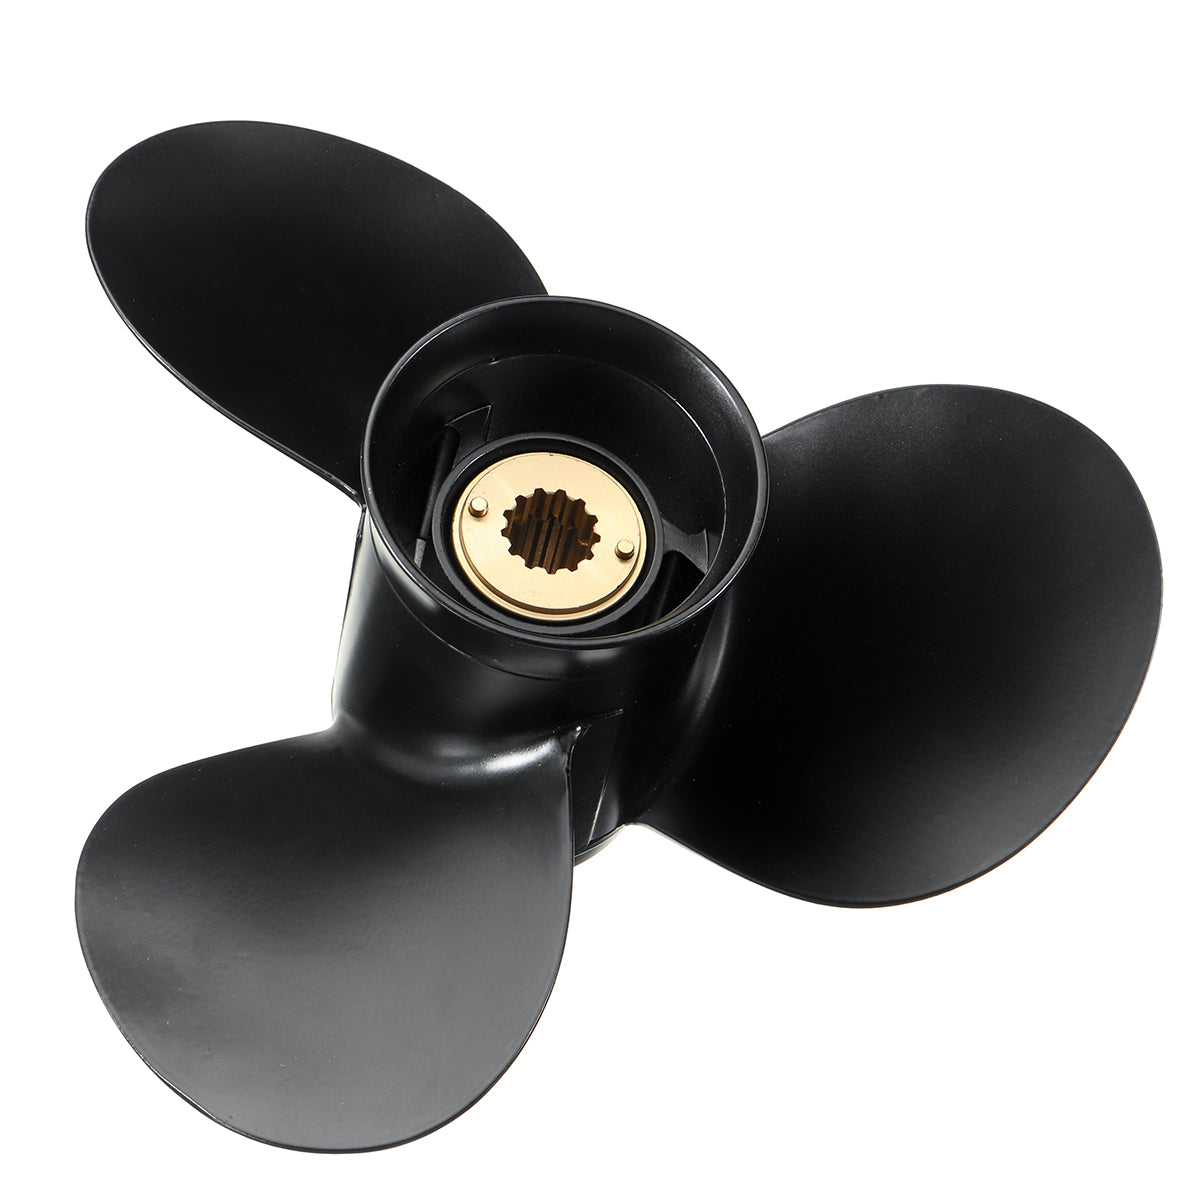 Black 9.9 x 13 Mariner Boat Outboard Propeller For Mercury Engine 25-30HP 48-19640A40